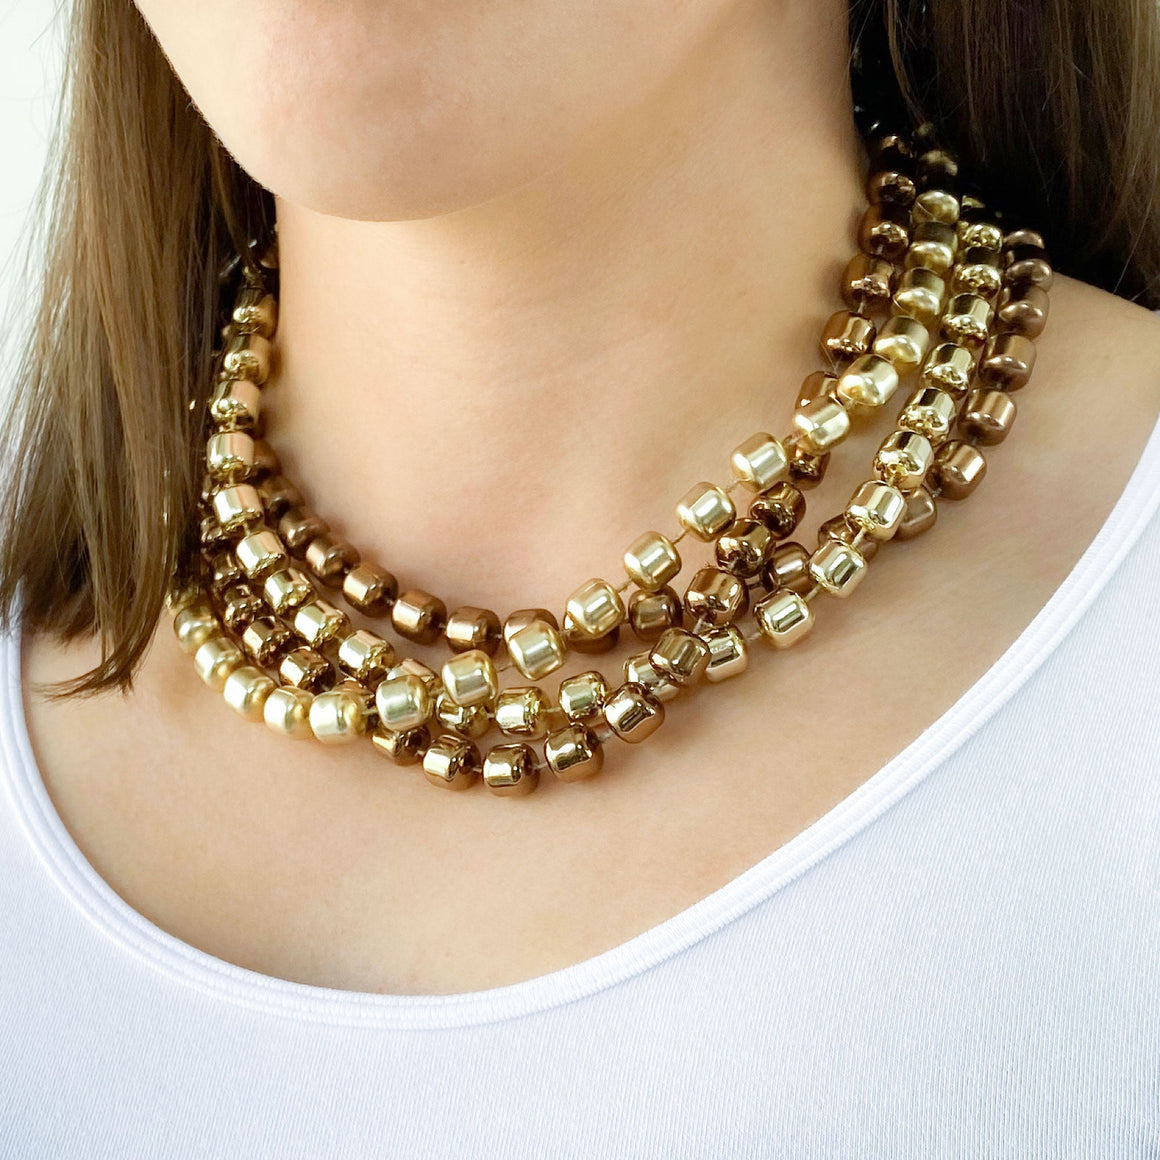 BIANCA gold and taupe statement necklace-GREEN BIJOU